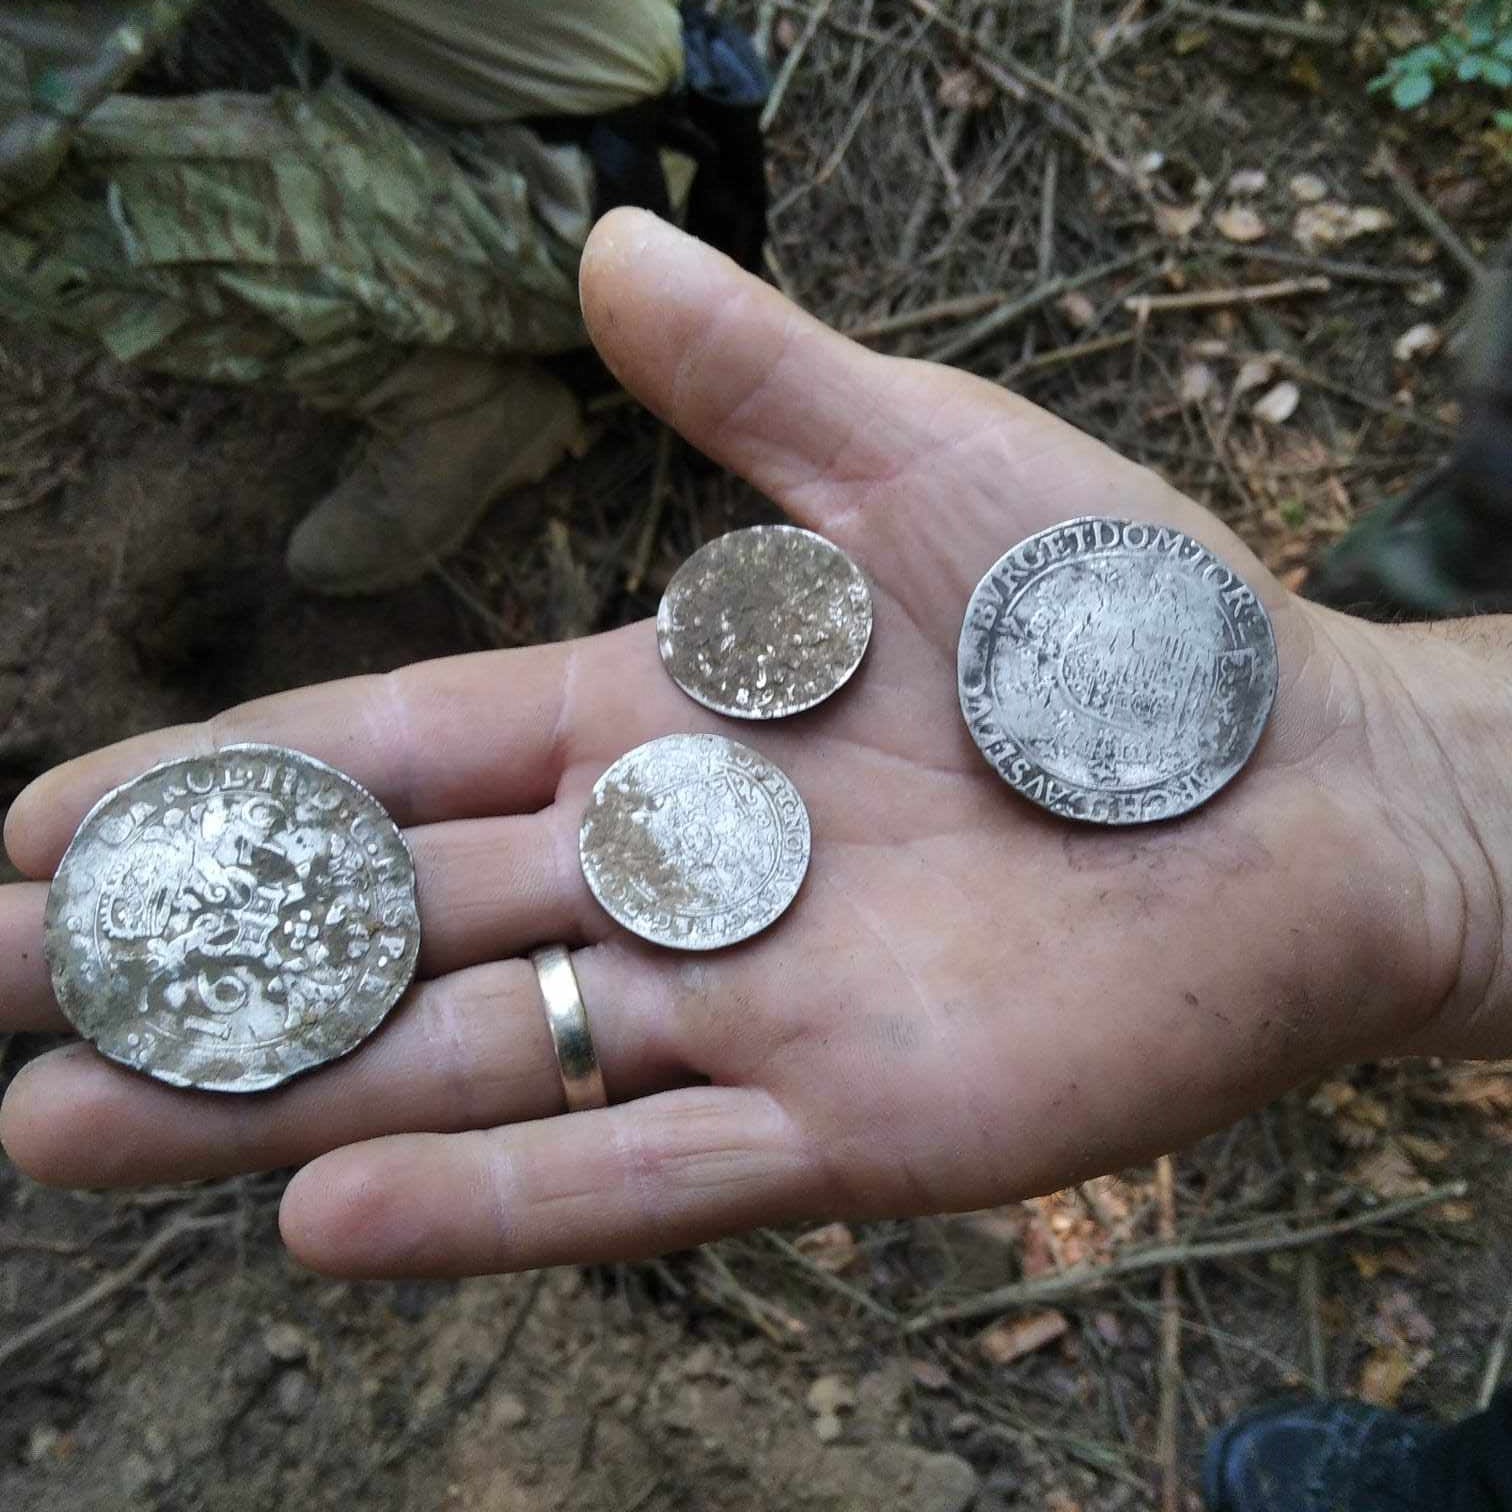 Detectives found the robber's gold and silver treasure